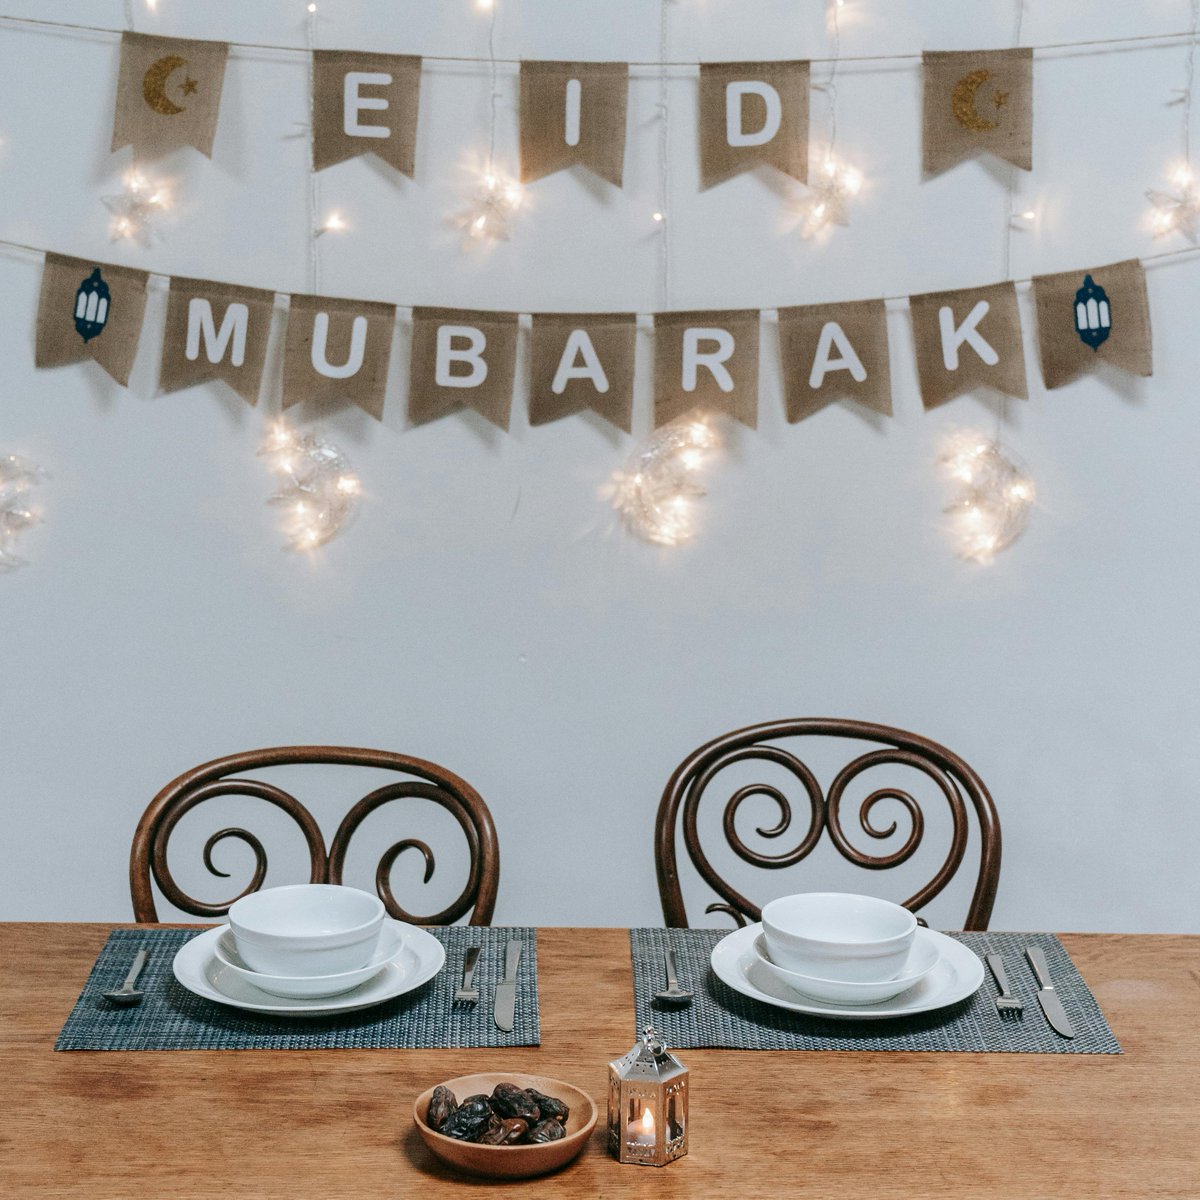 Today is Eid ul-Fitr, marking the end of Ramadan🌙! Eid Mubarak to all our families and staff celebrating!🥳